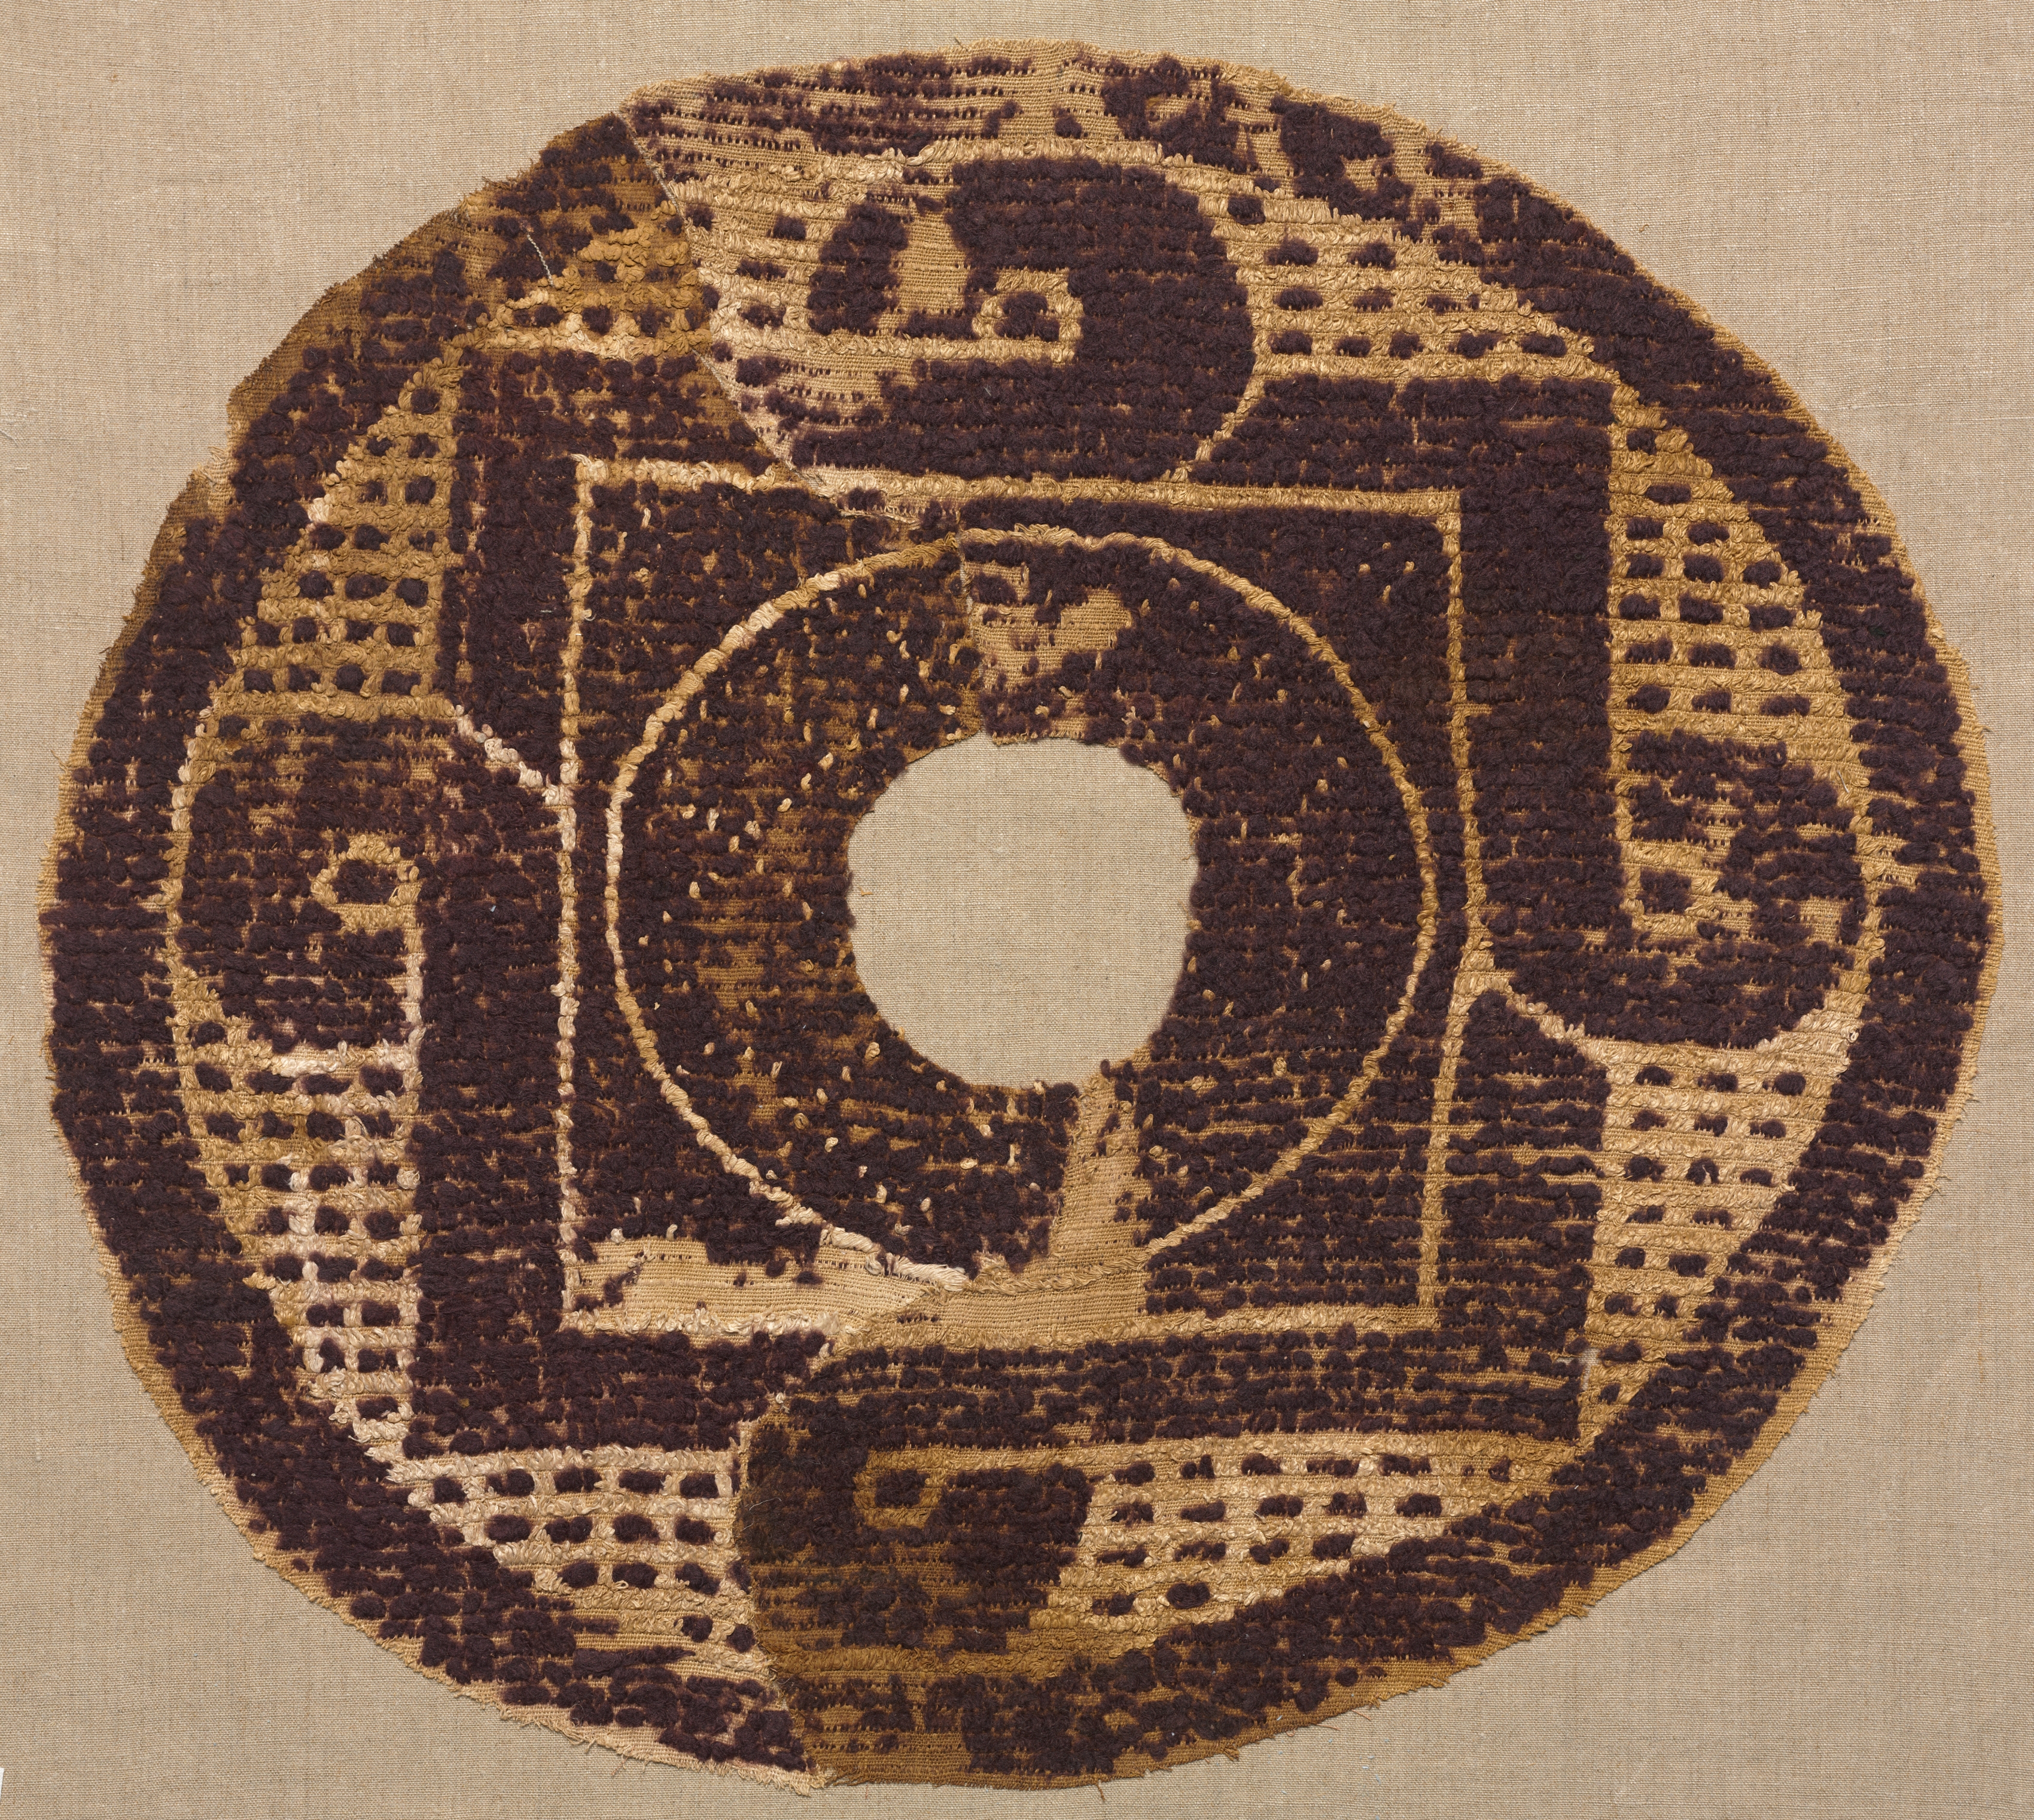 Roundel from a Blanket or Cover